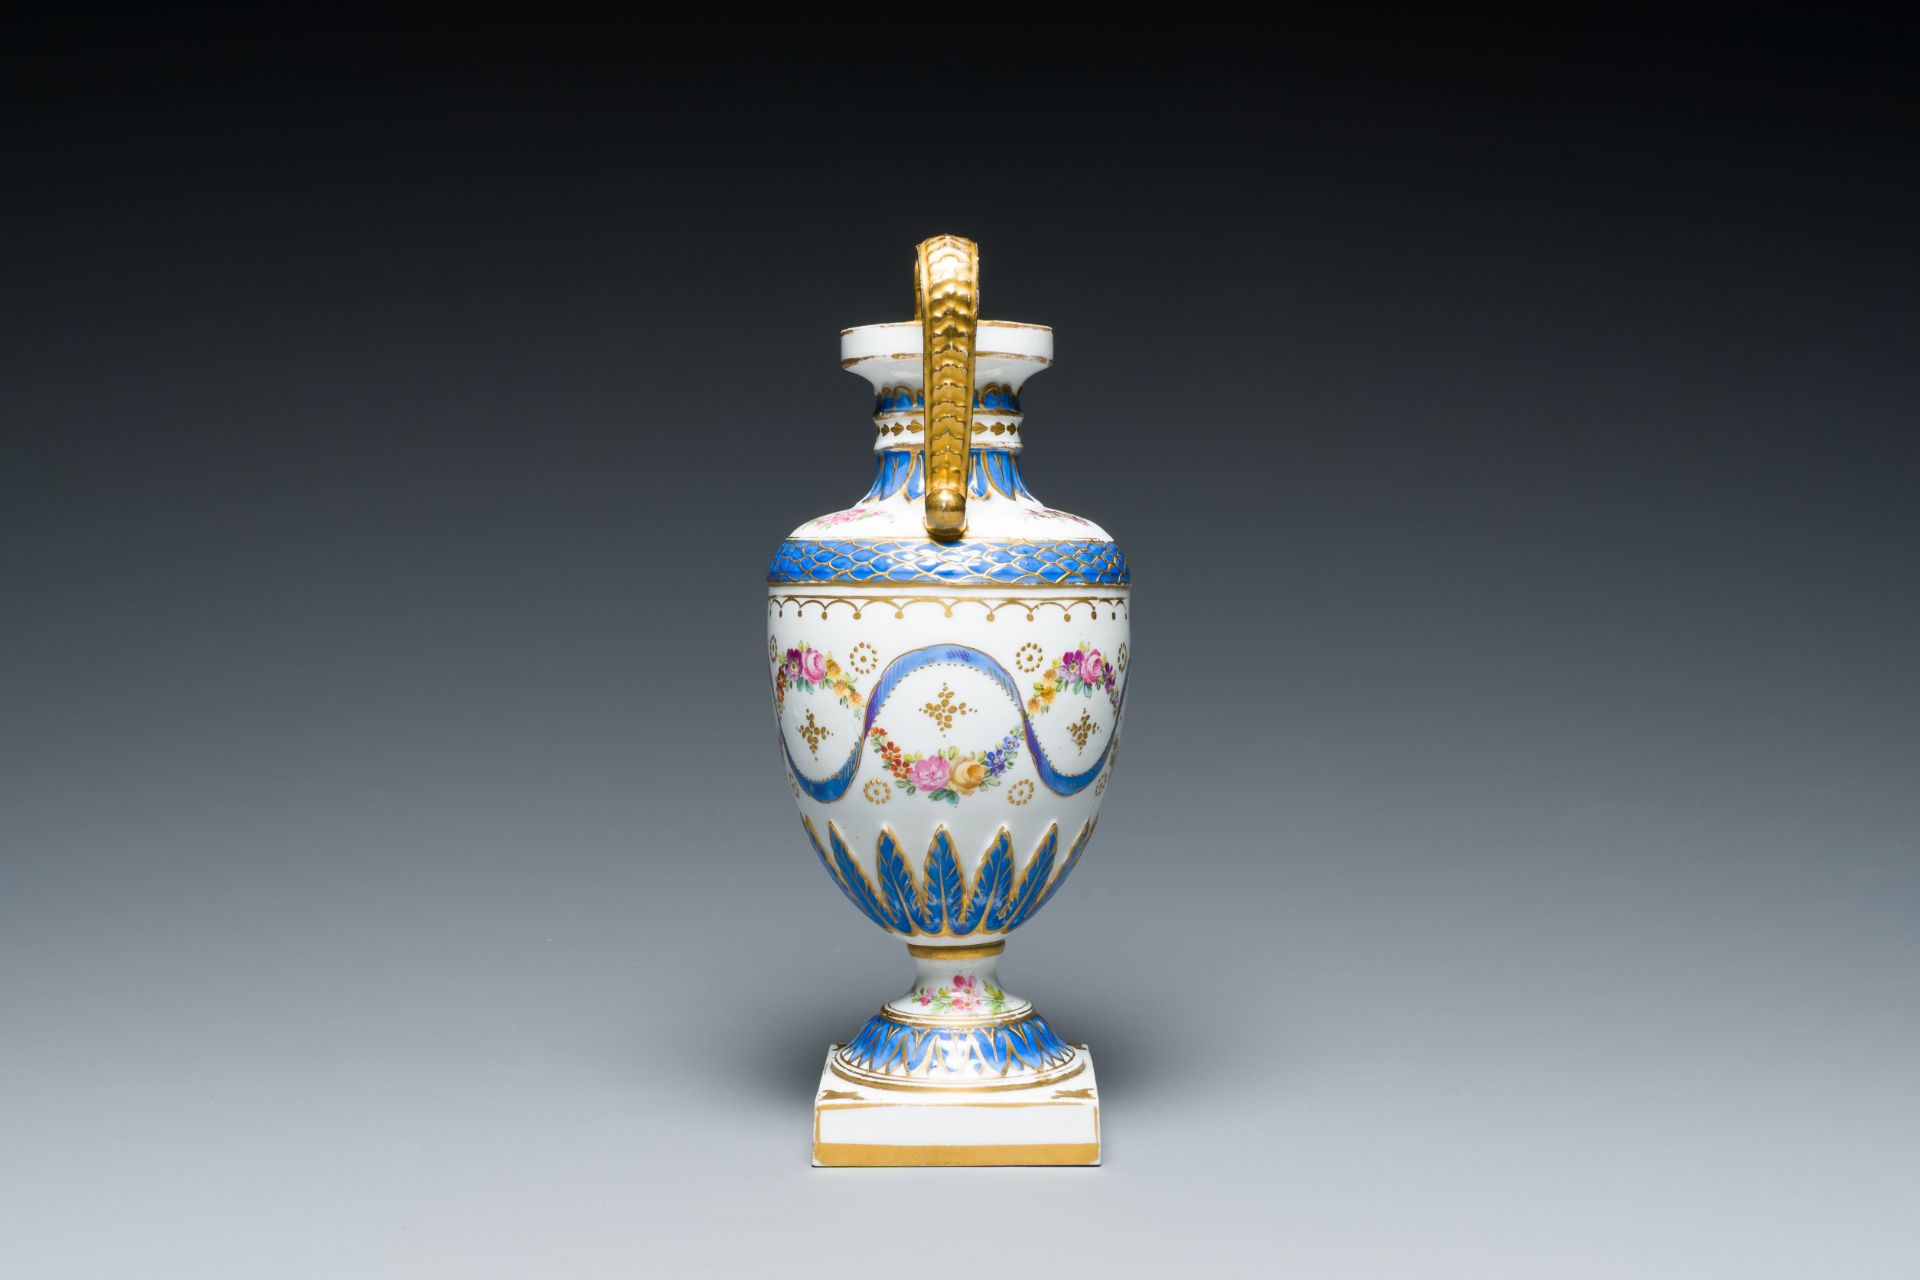 A French polychrome porcelain Sevres-style vase, 19th C. - Image 10 of 16